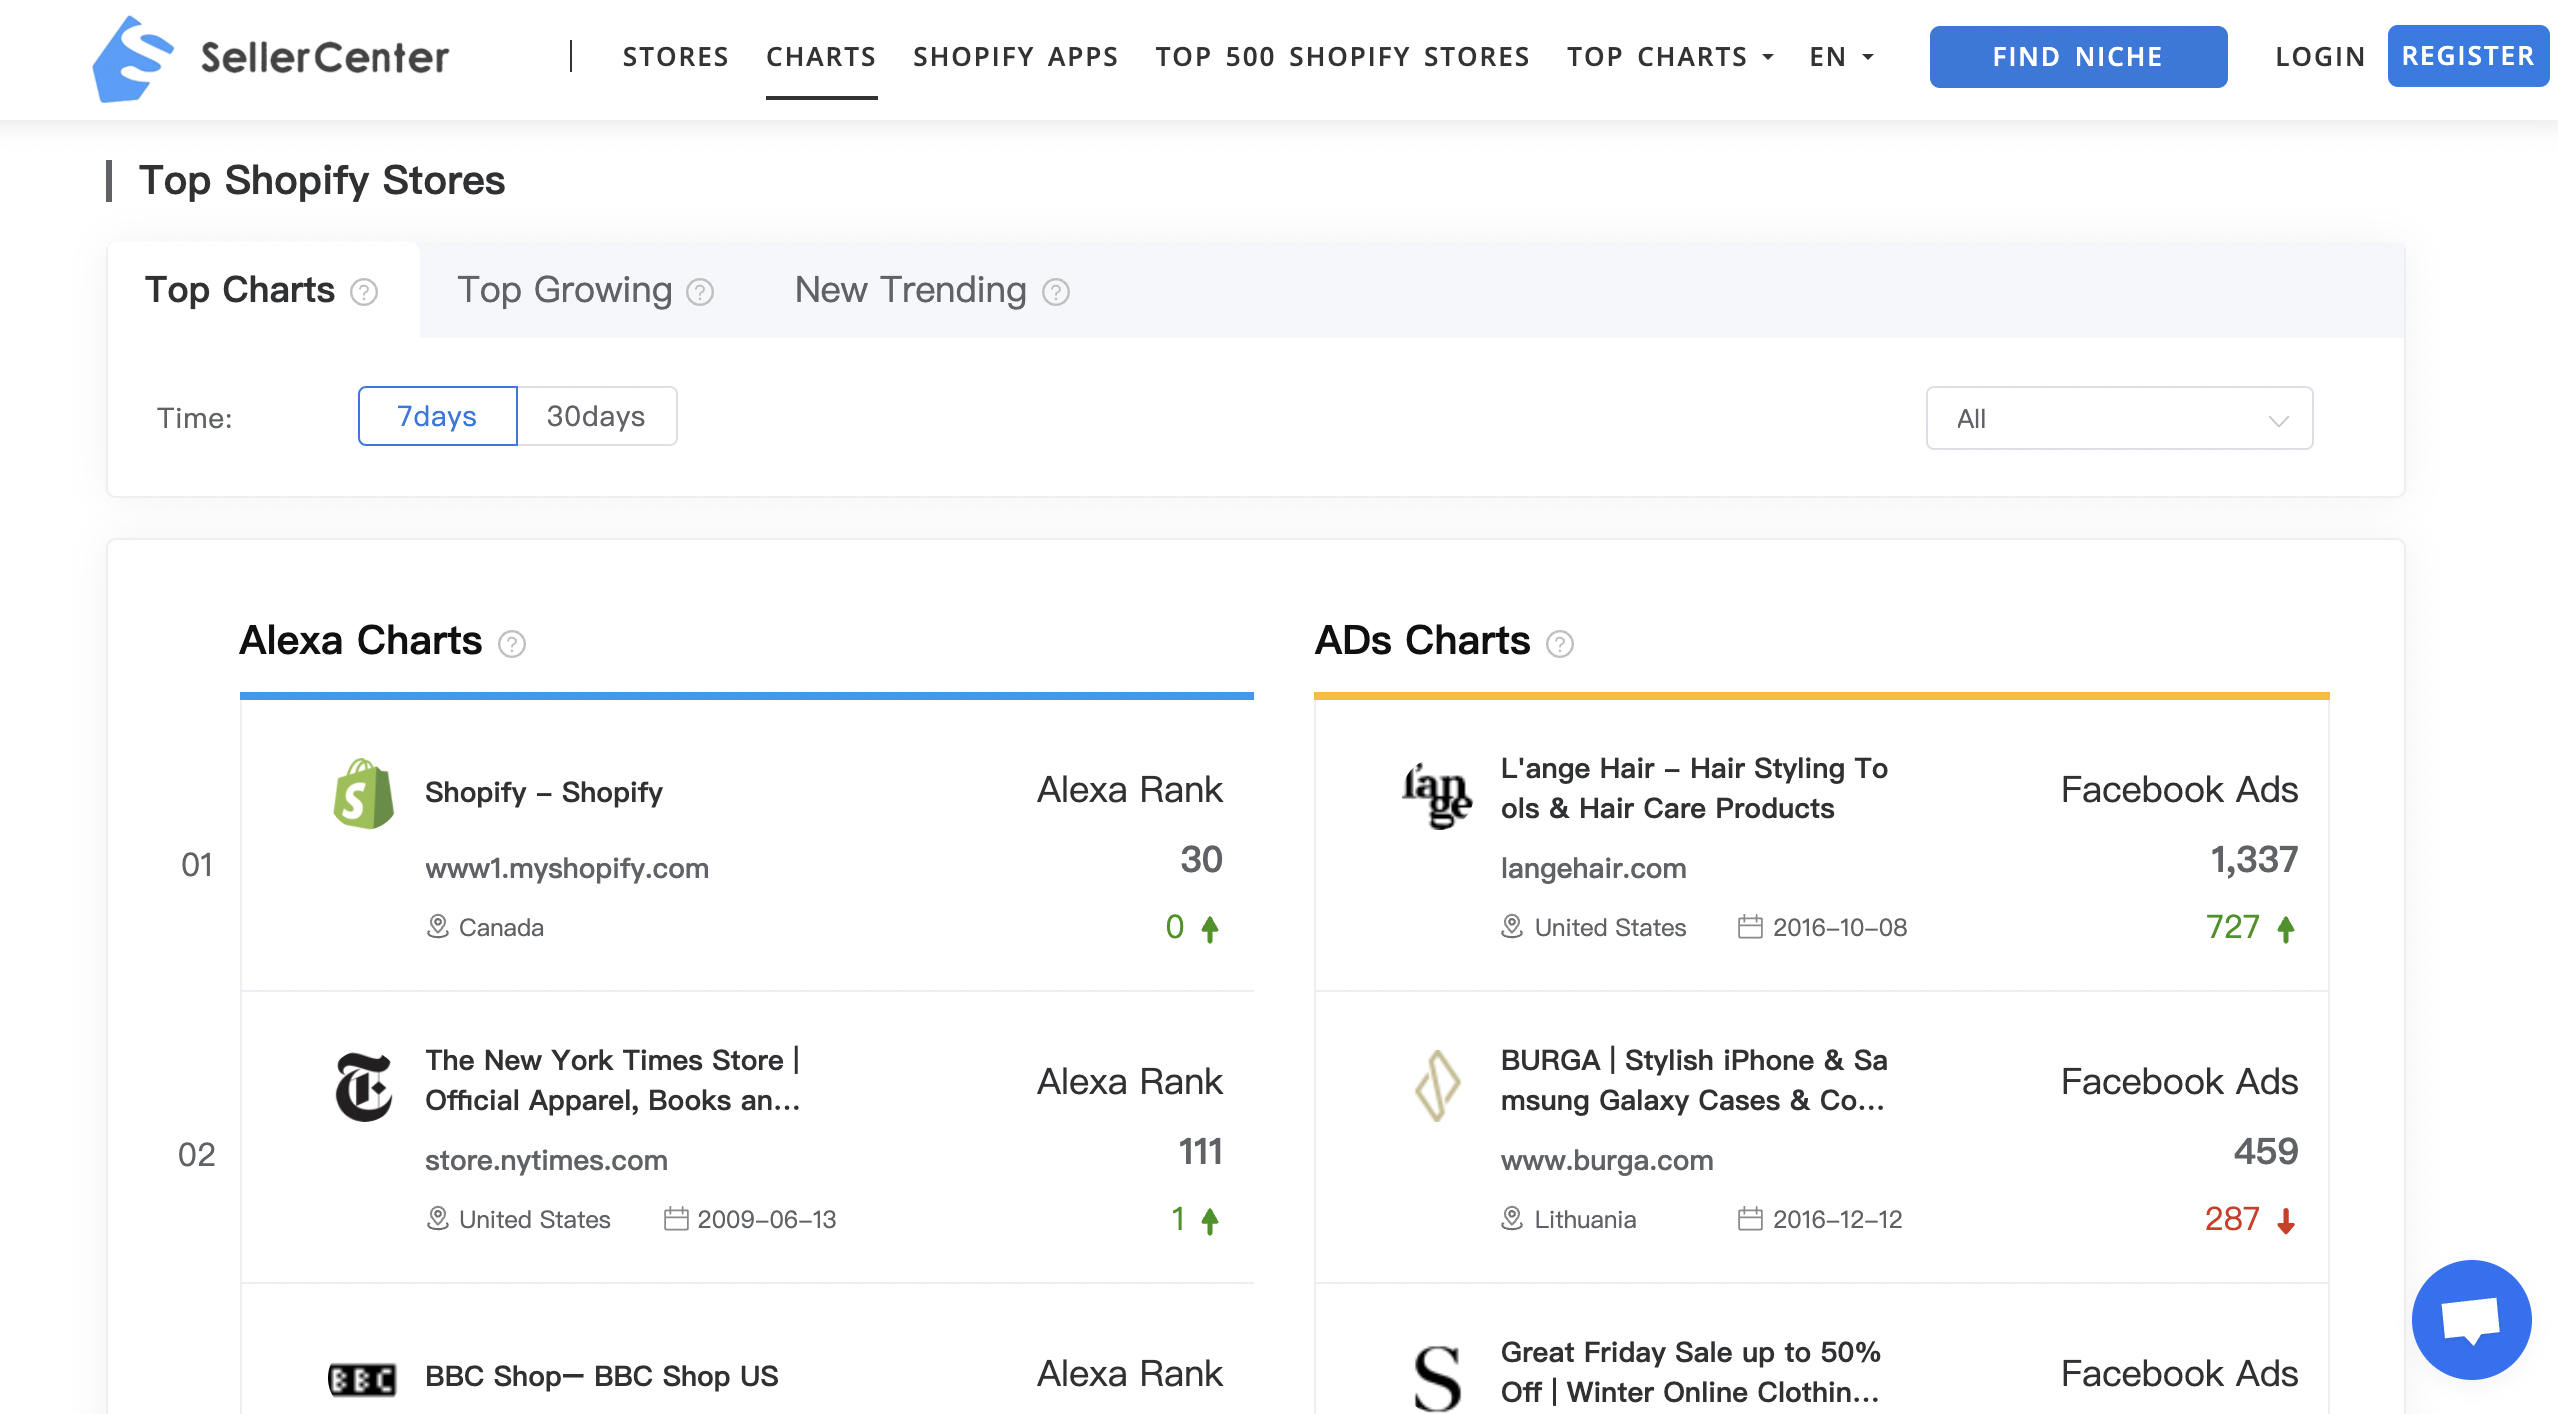 Explore New Opportunities Through Top Shopify Charts